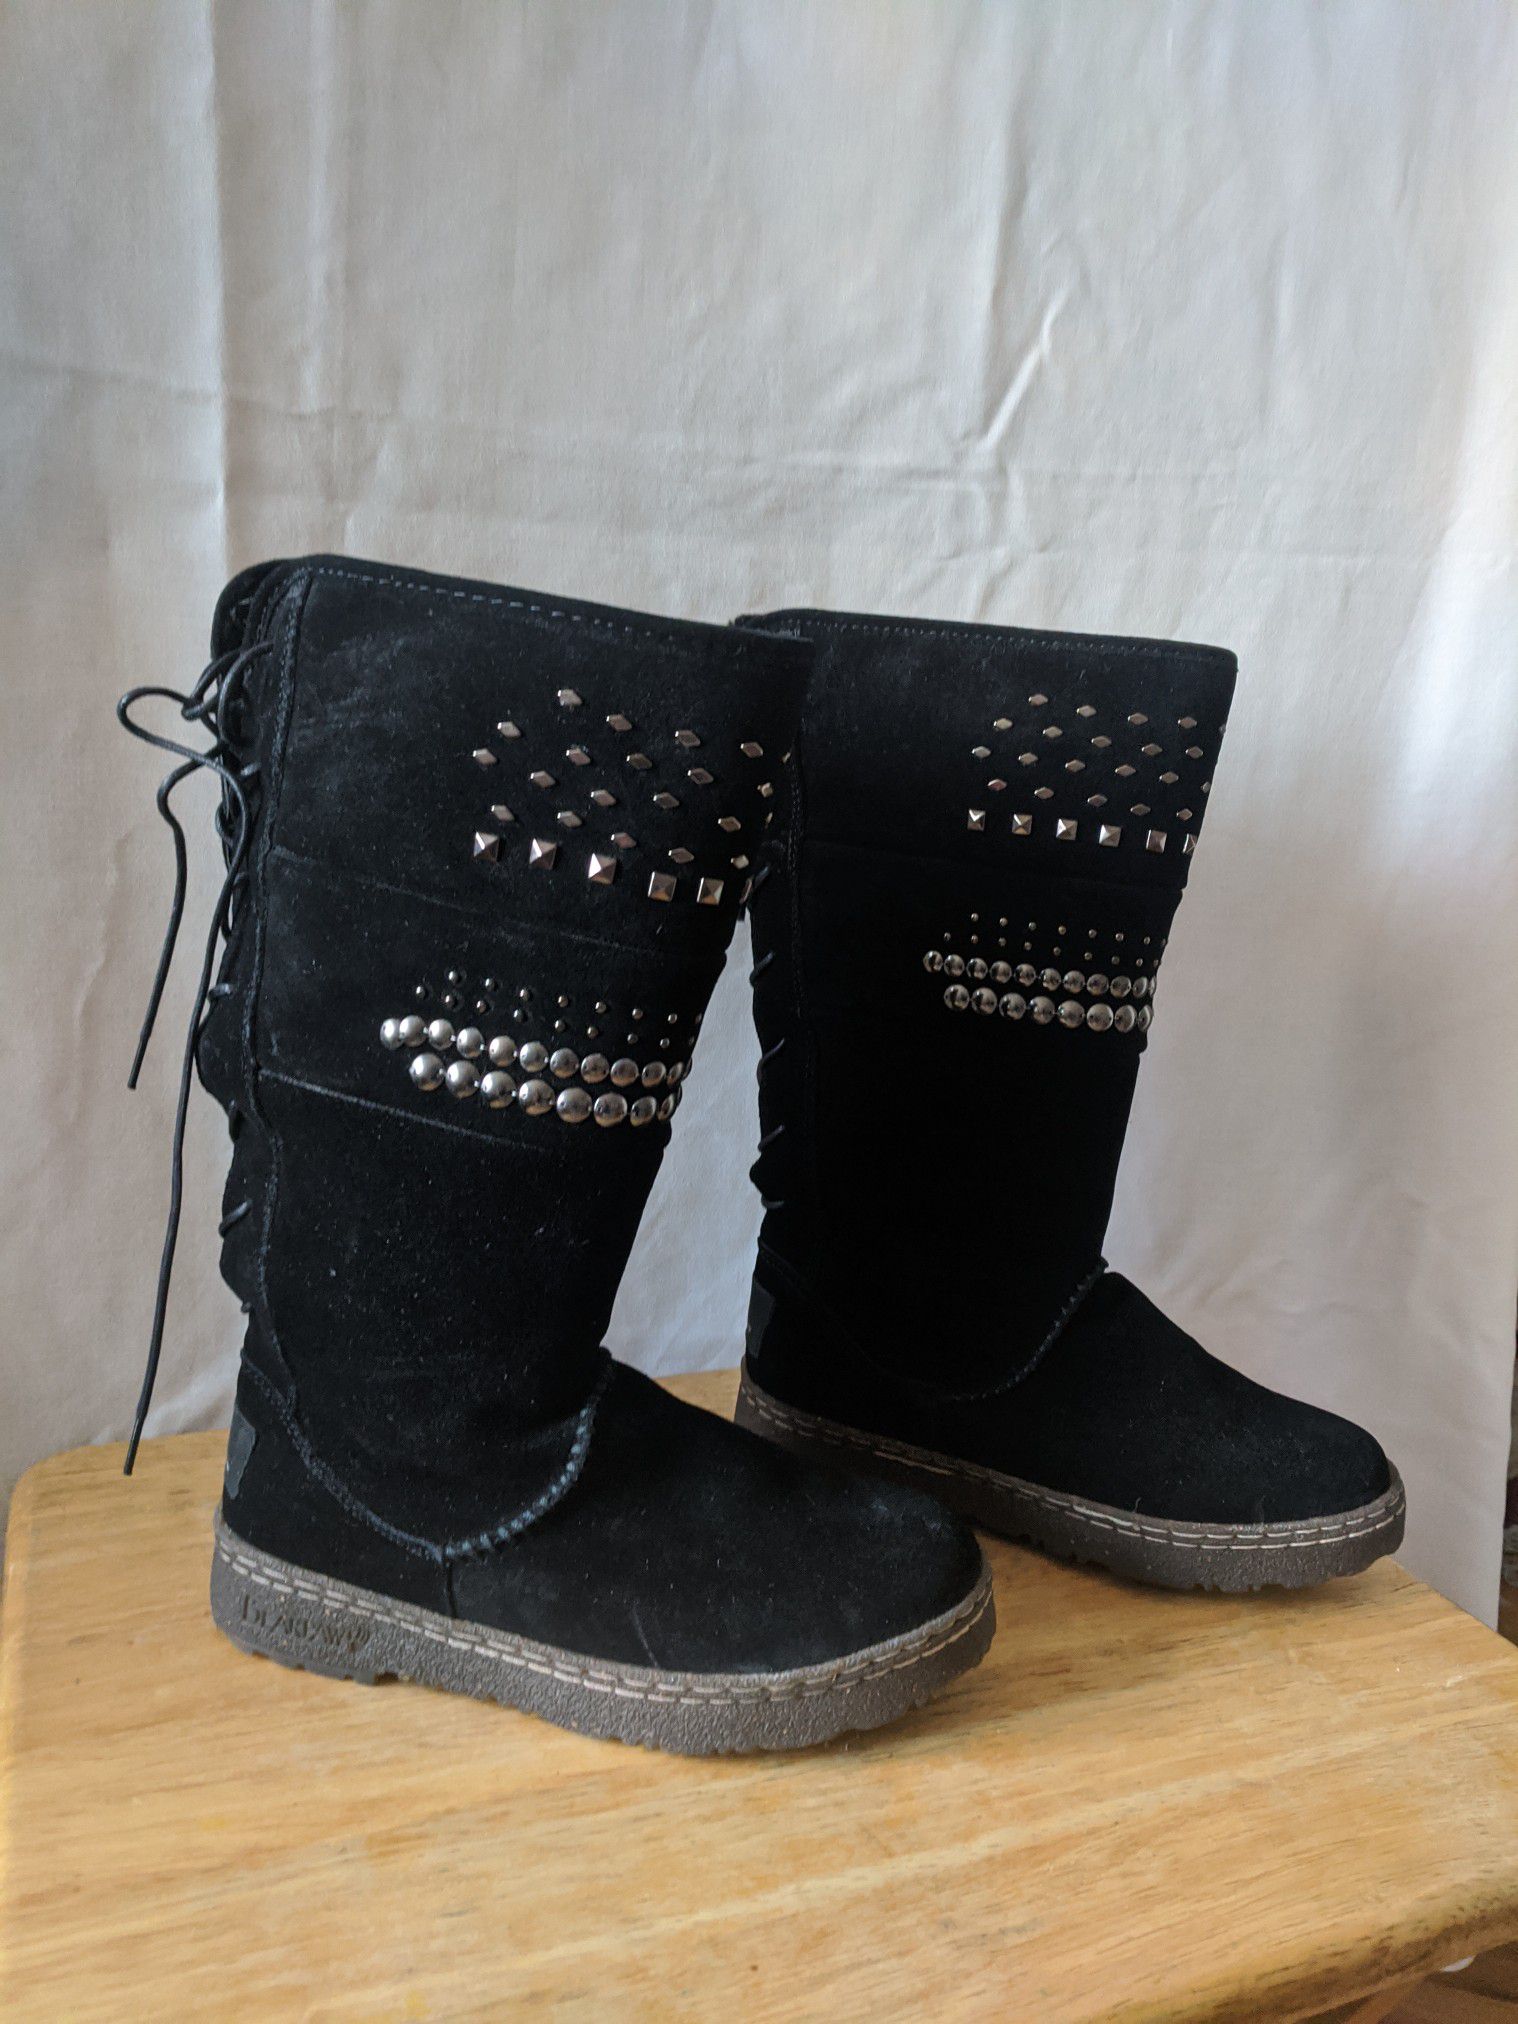 Bearpaw studded black suade Boots